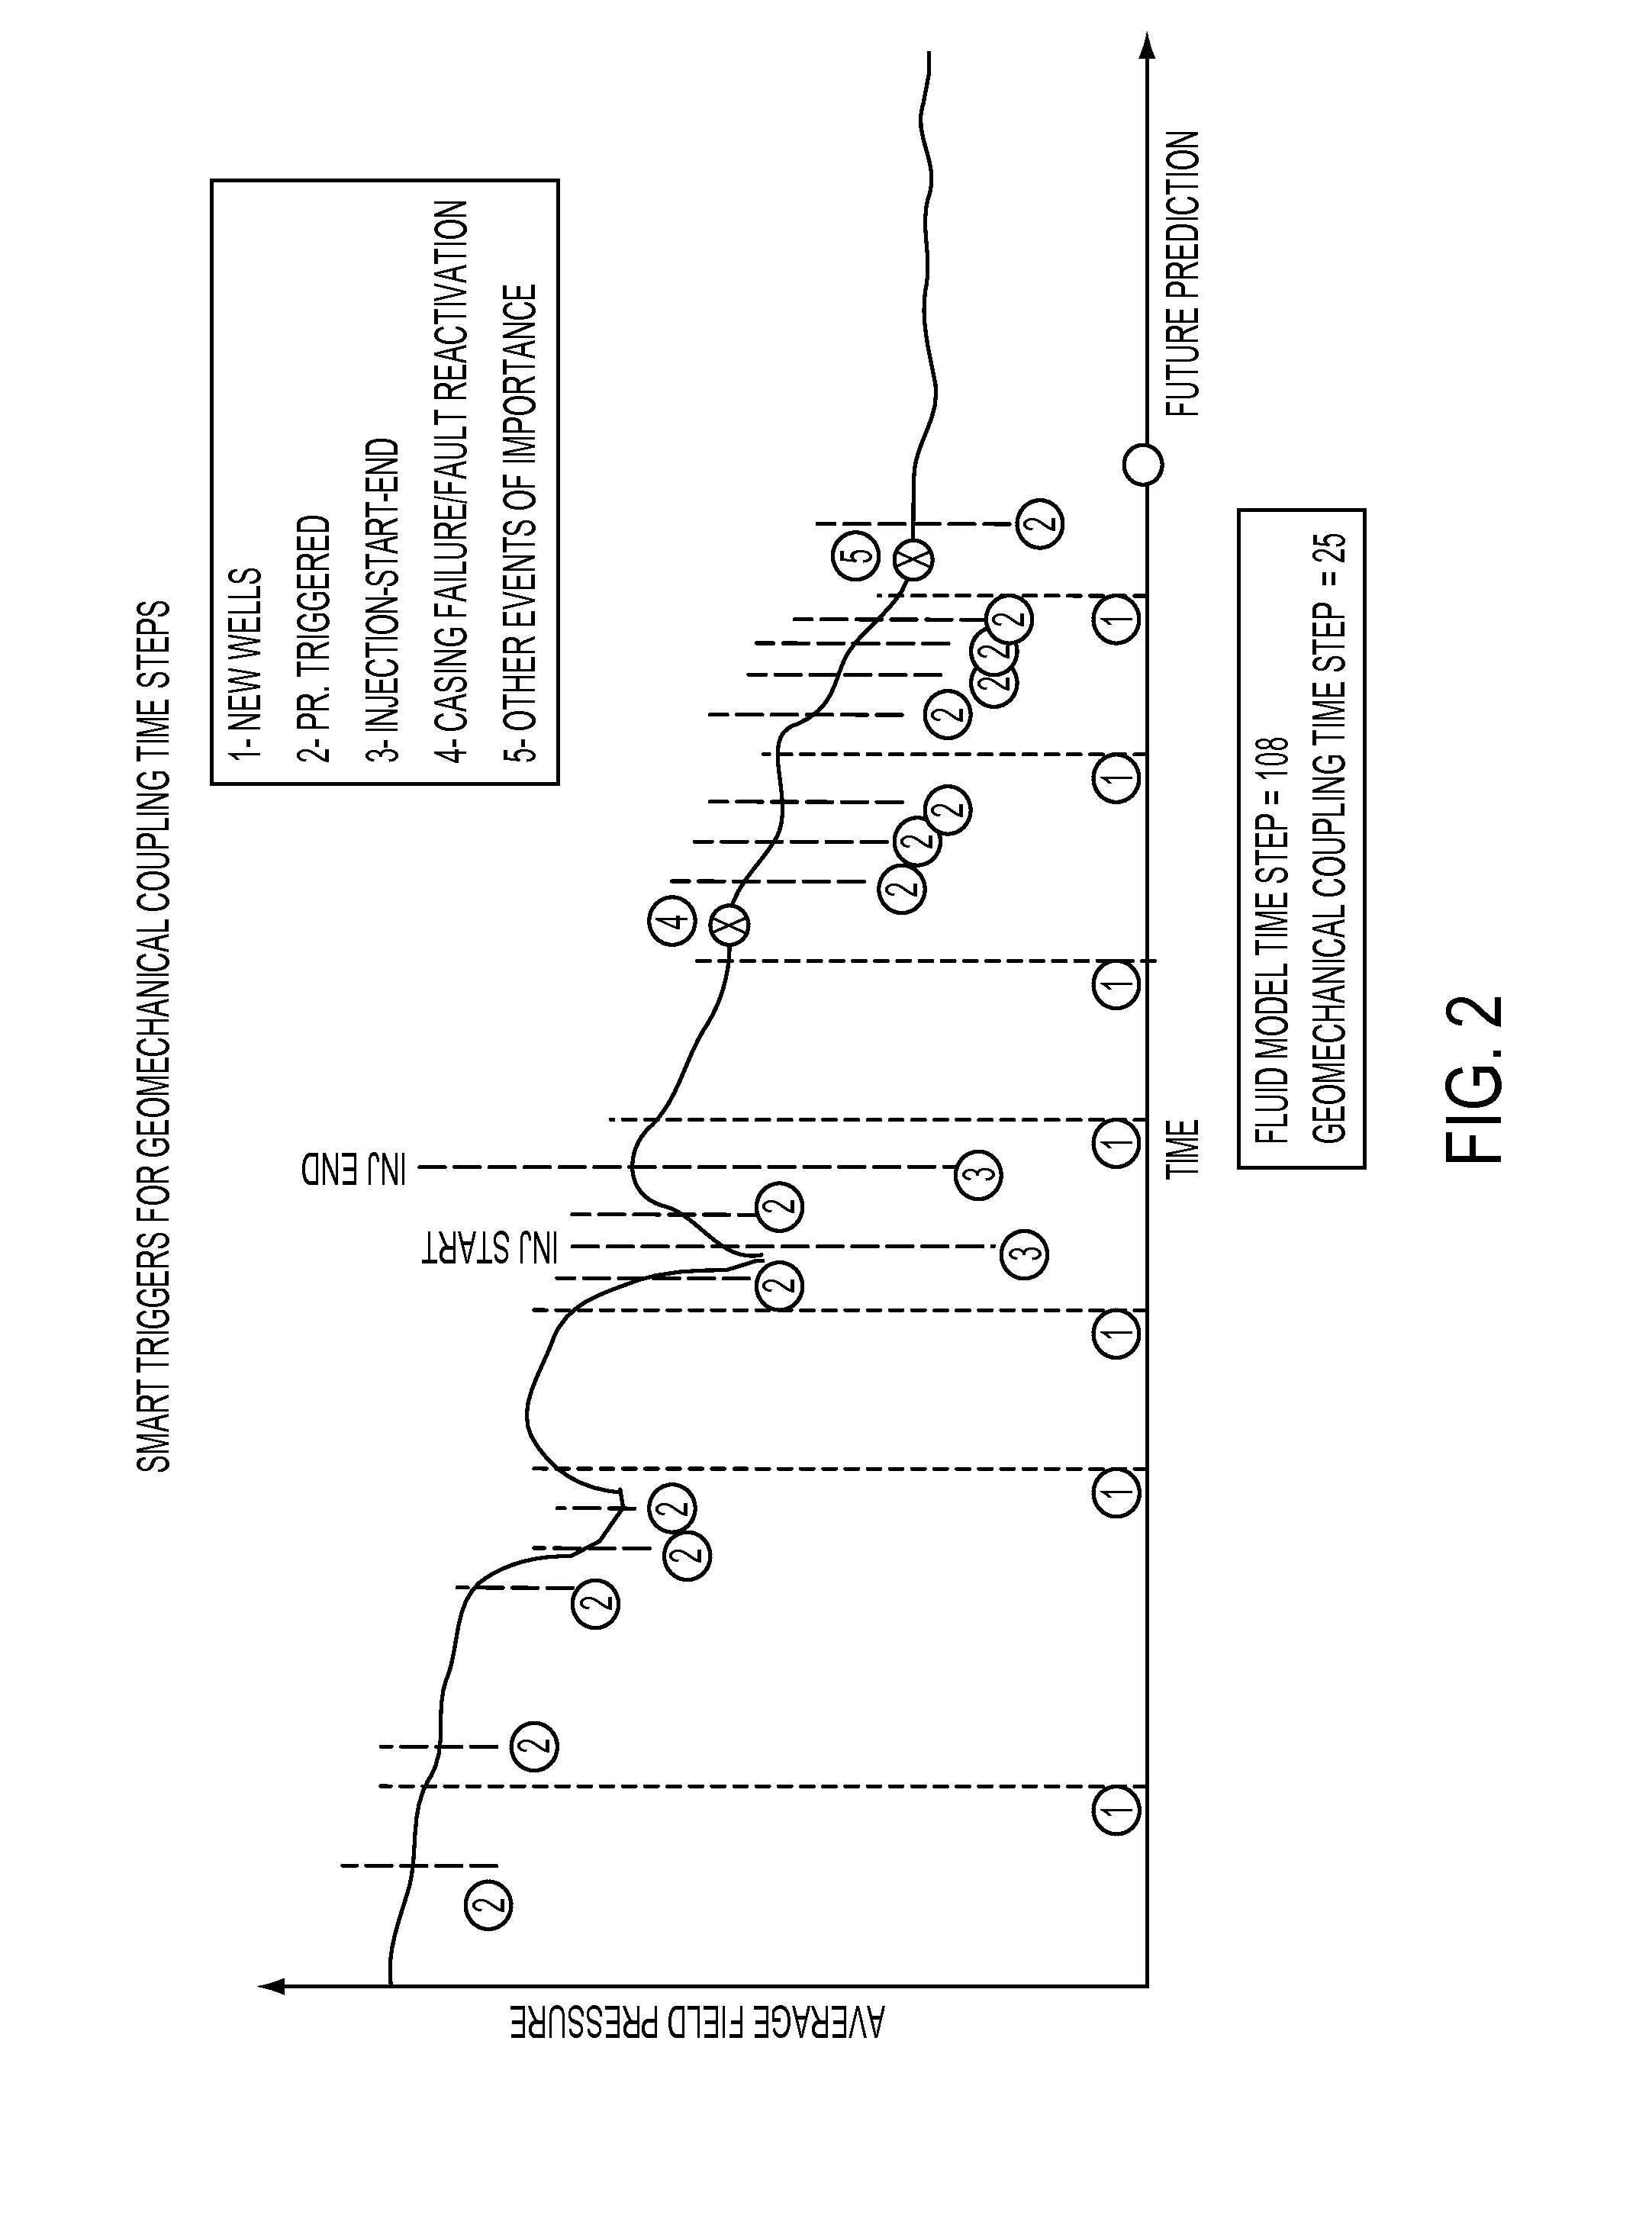 Method to couple fluid-flow and geomechanical models for integrated petroleum systems using known triggering events